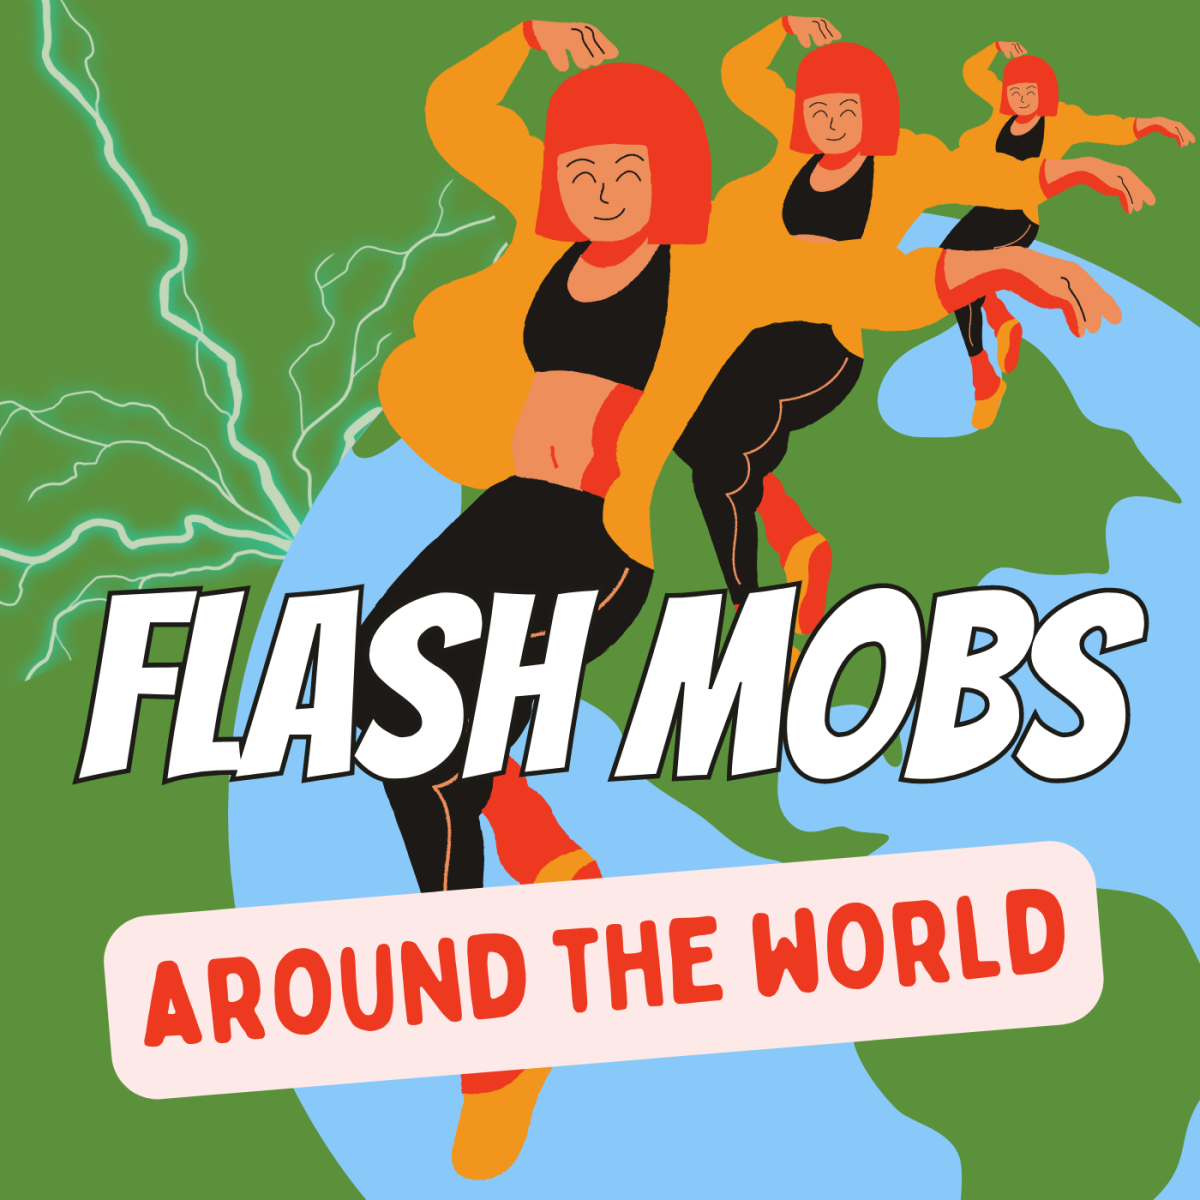 A flash mob dance can pop up anywhere in the world!